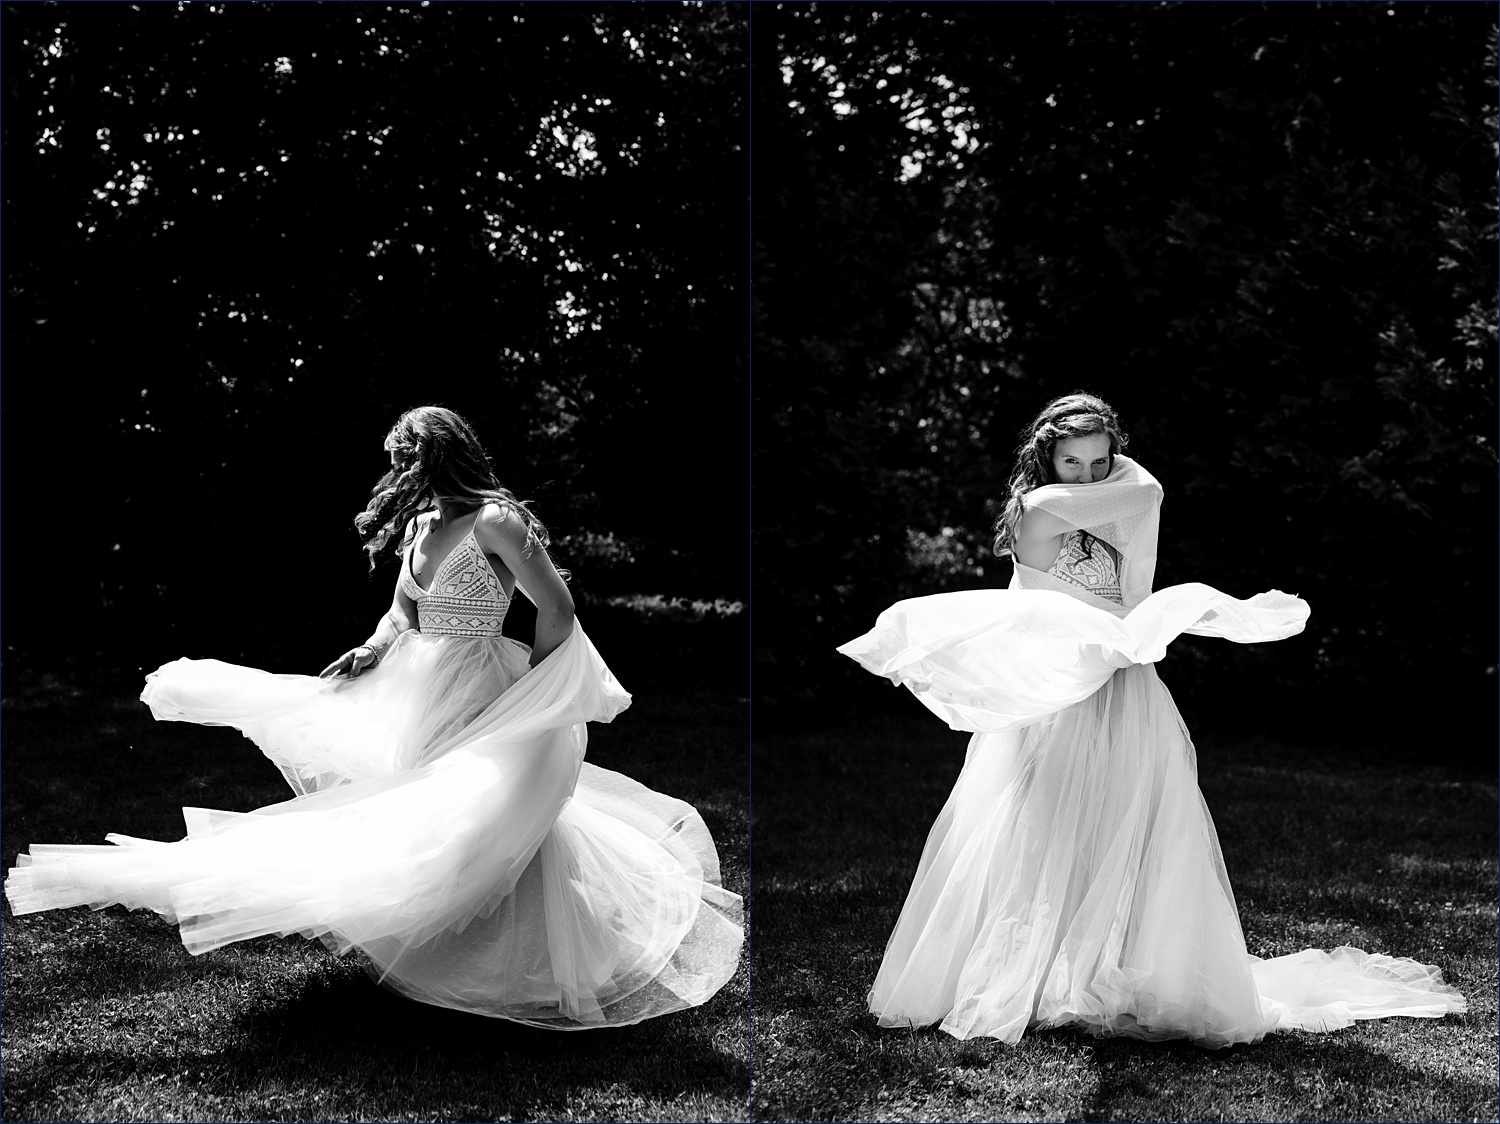 The bride spins in her wedding gown in the gardens of Andover MA